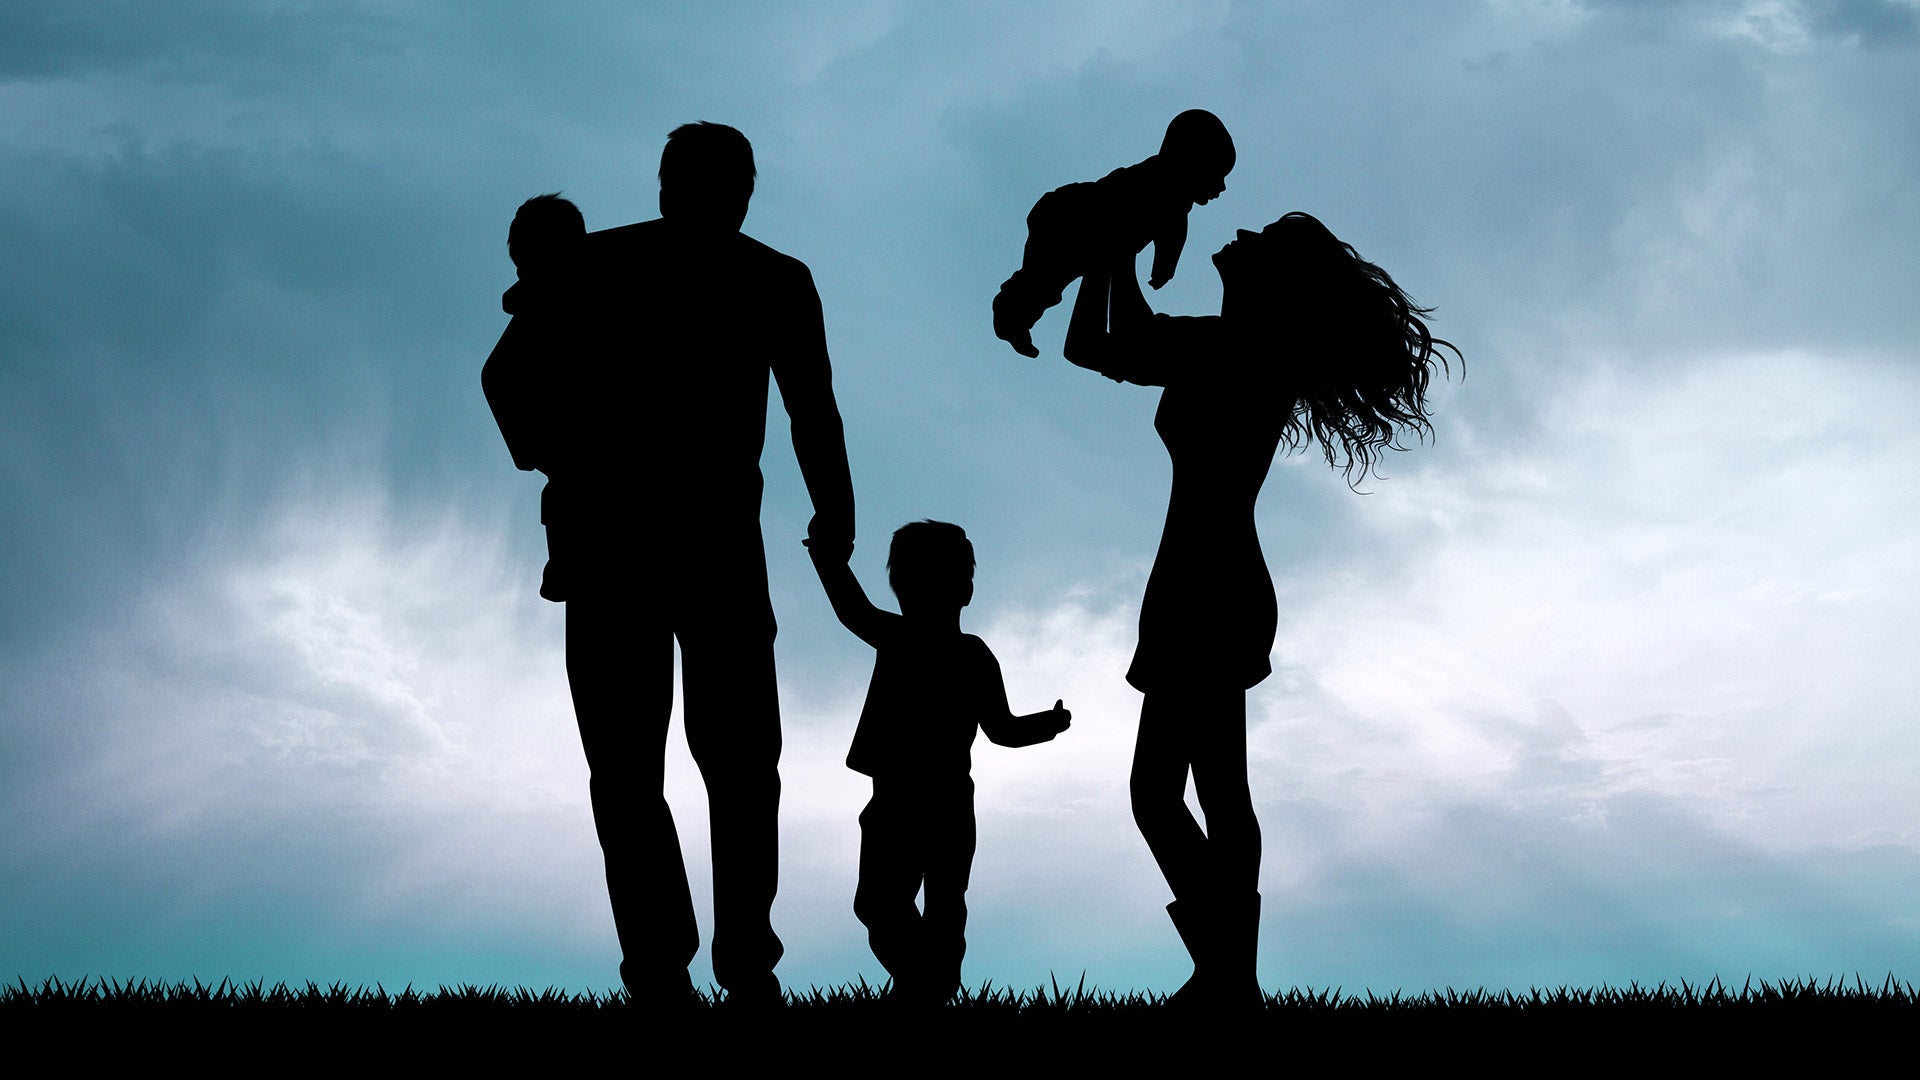 Image of a family silhouette at sunset